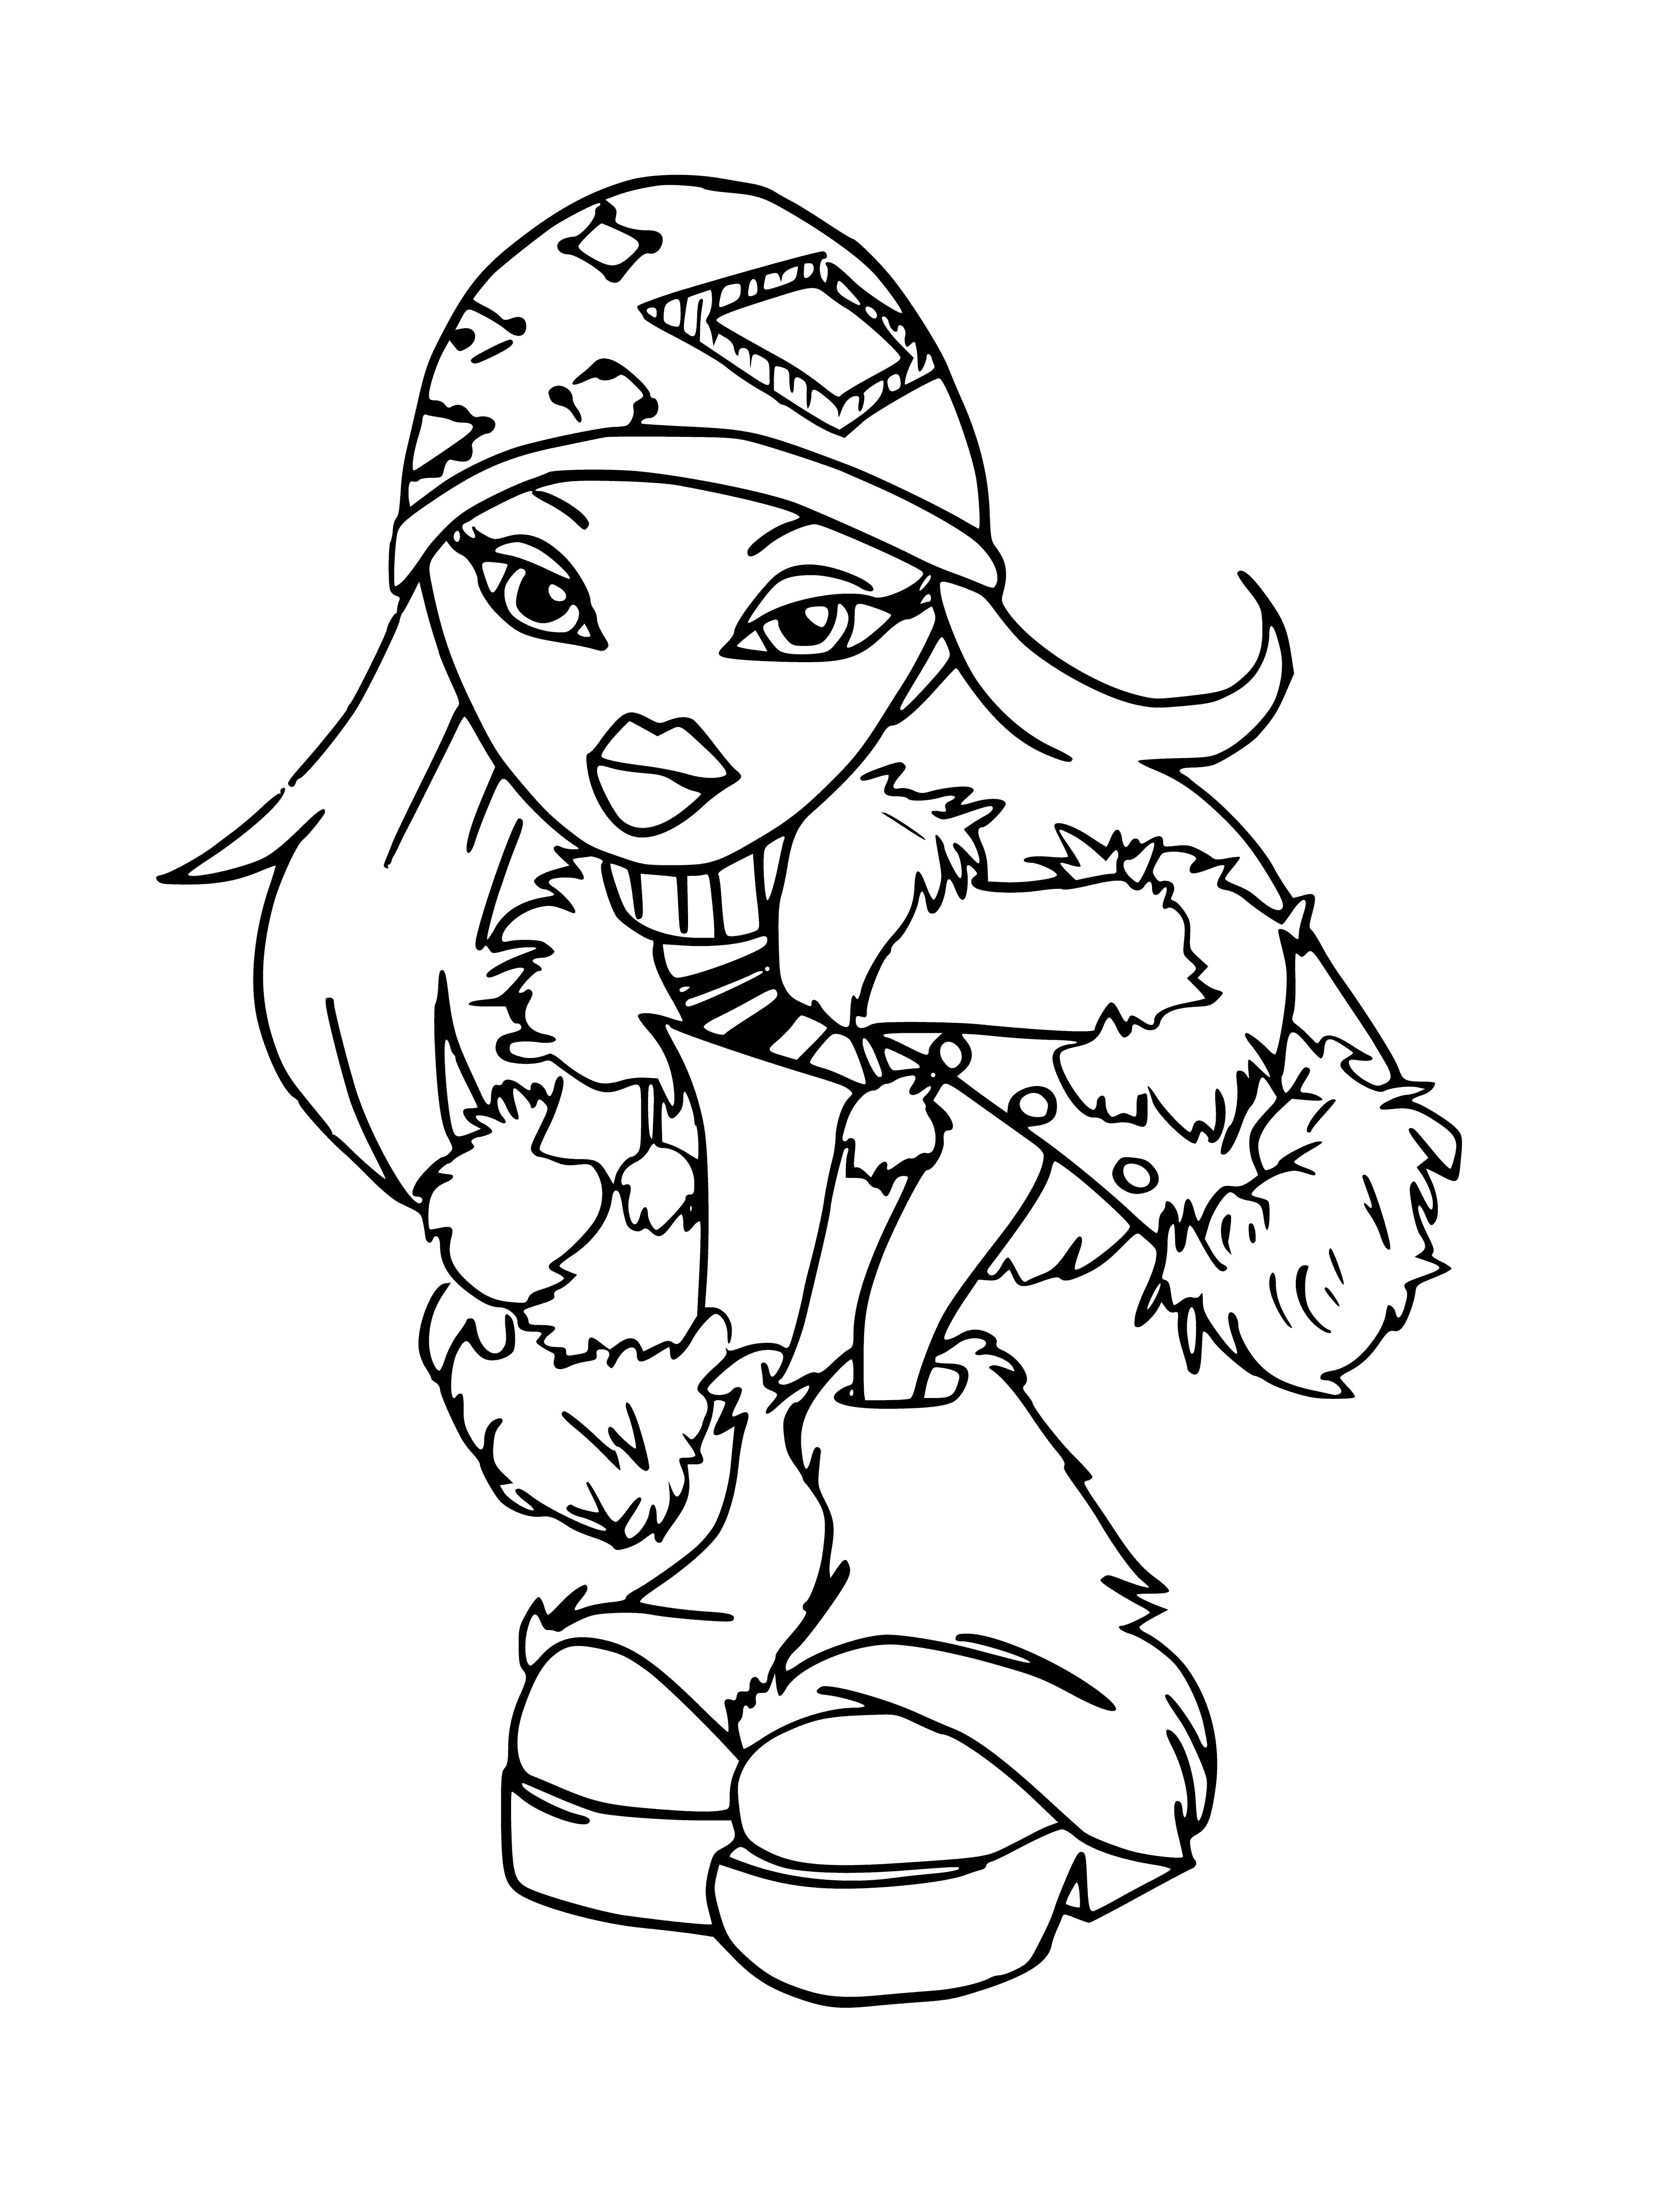 coloring page: The Bratz are all wrapped up in warm winter gear, walking in the gentle snowfall.